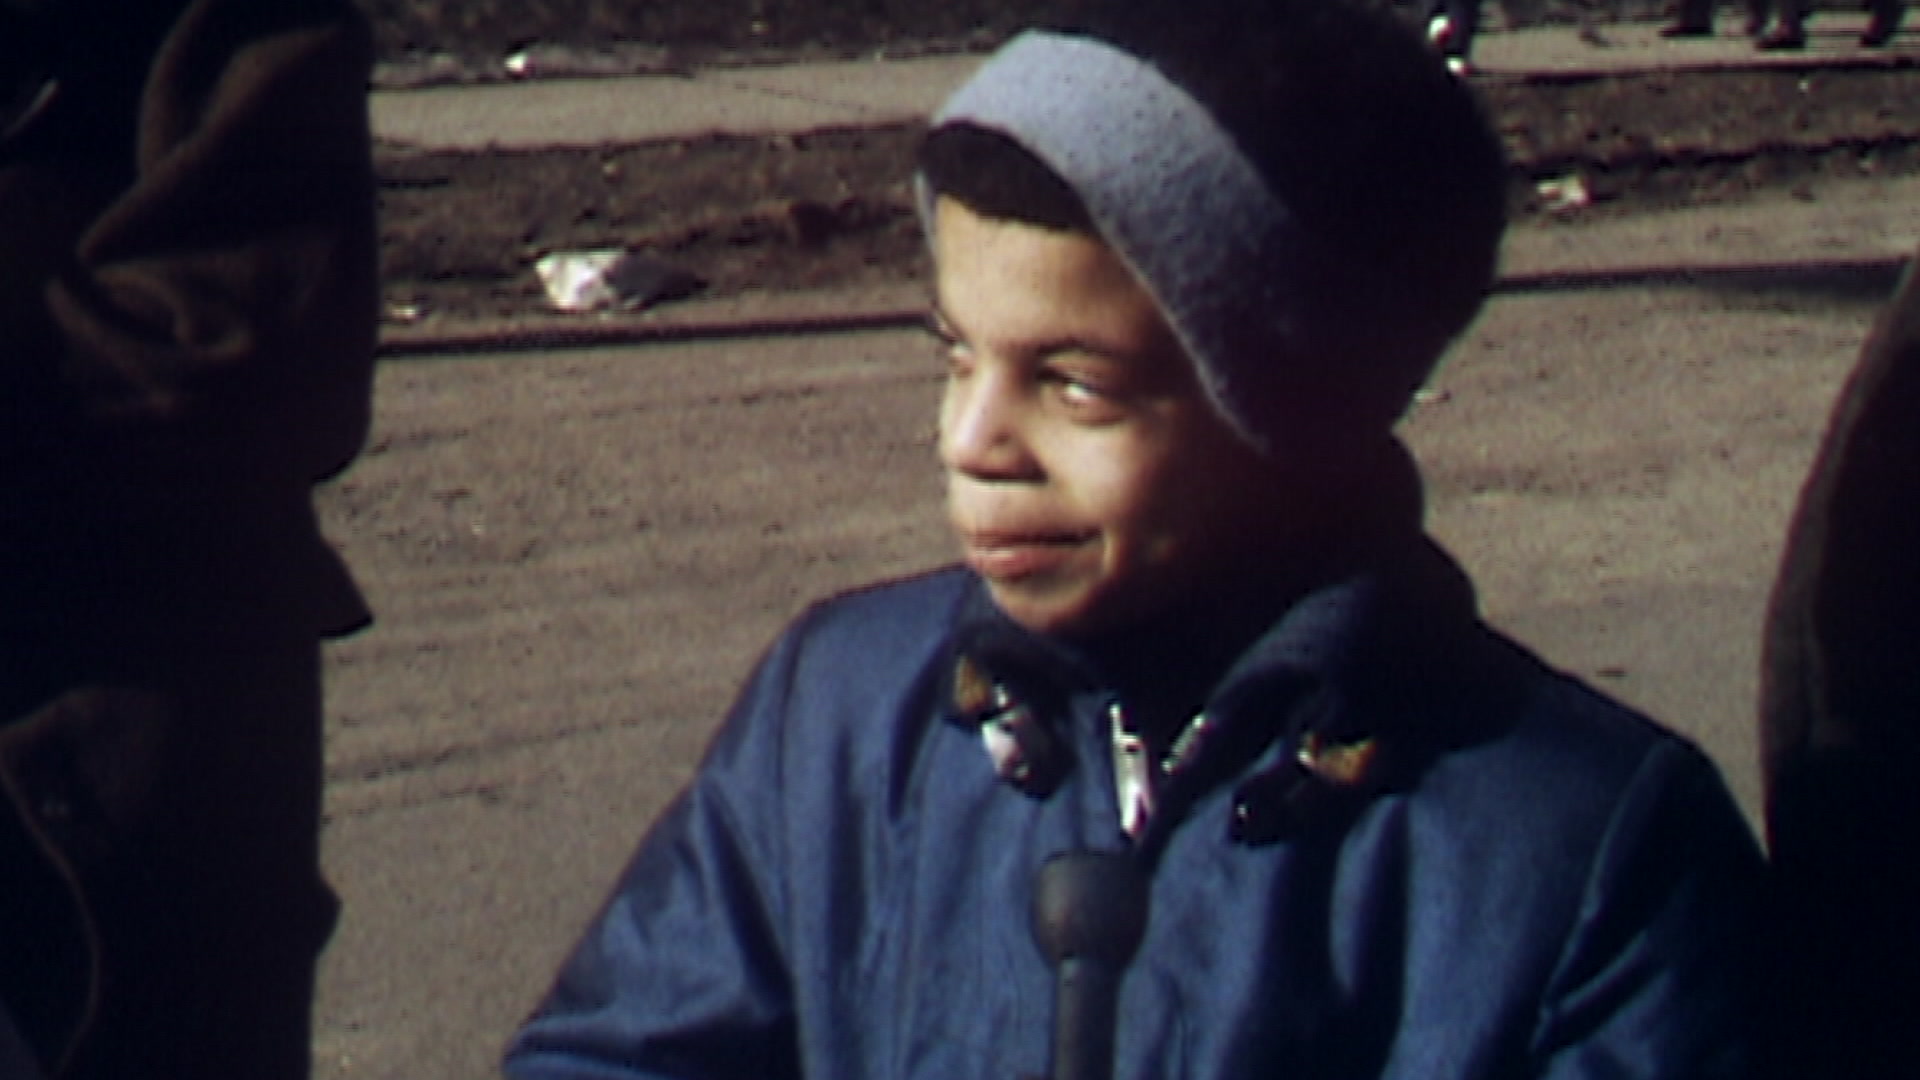 Film Of Prince At Age 11 Discovered In Archival Footage Of 1970 Mpls. Teachers Strike – WCCO